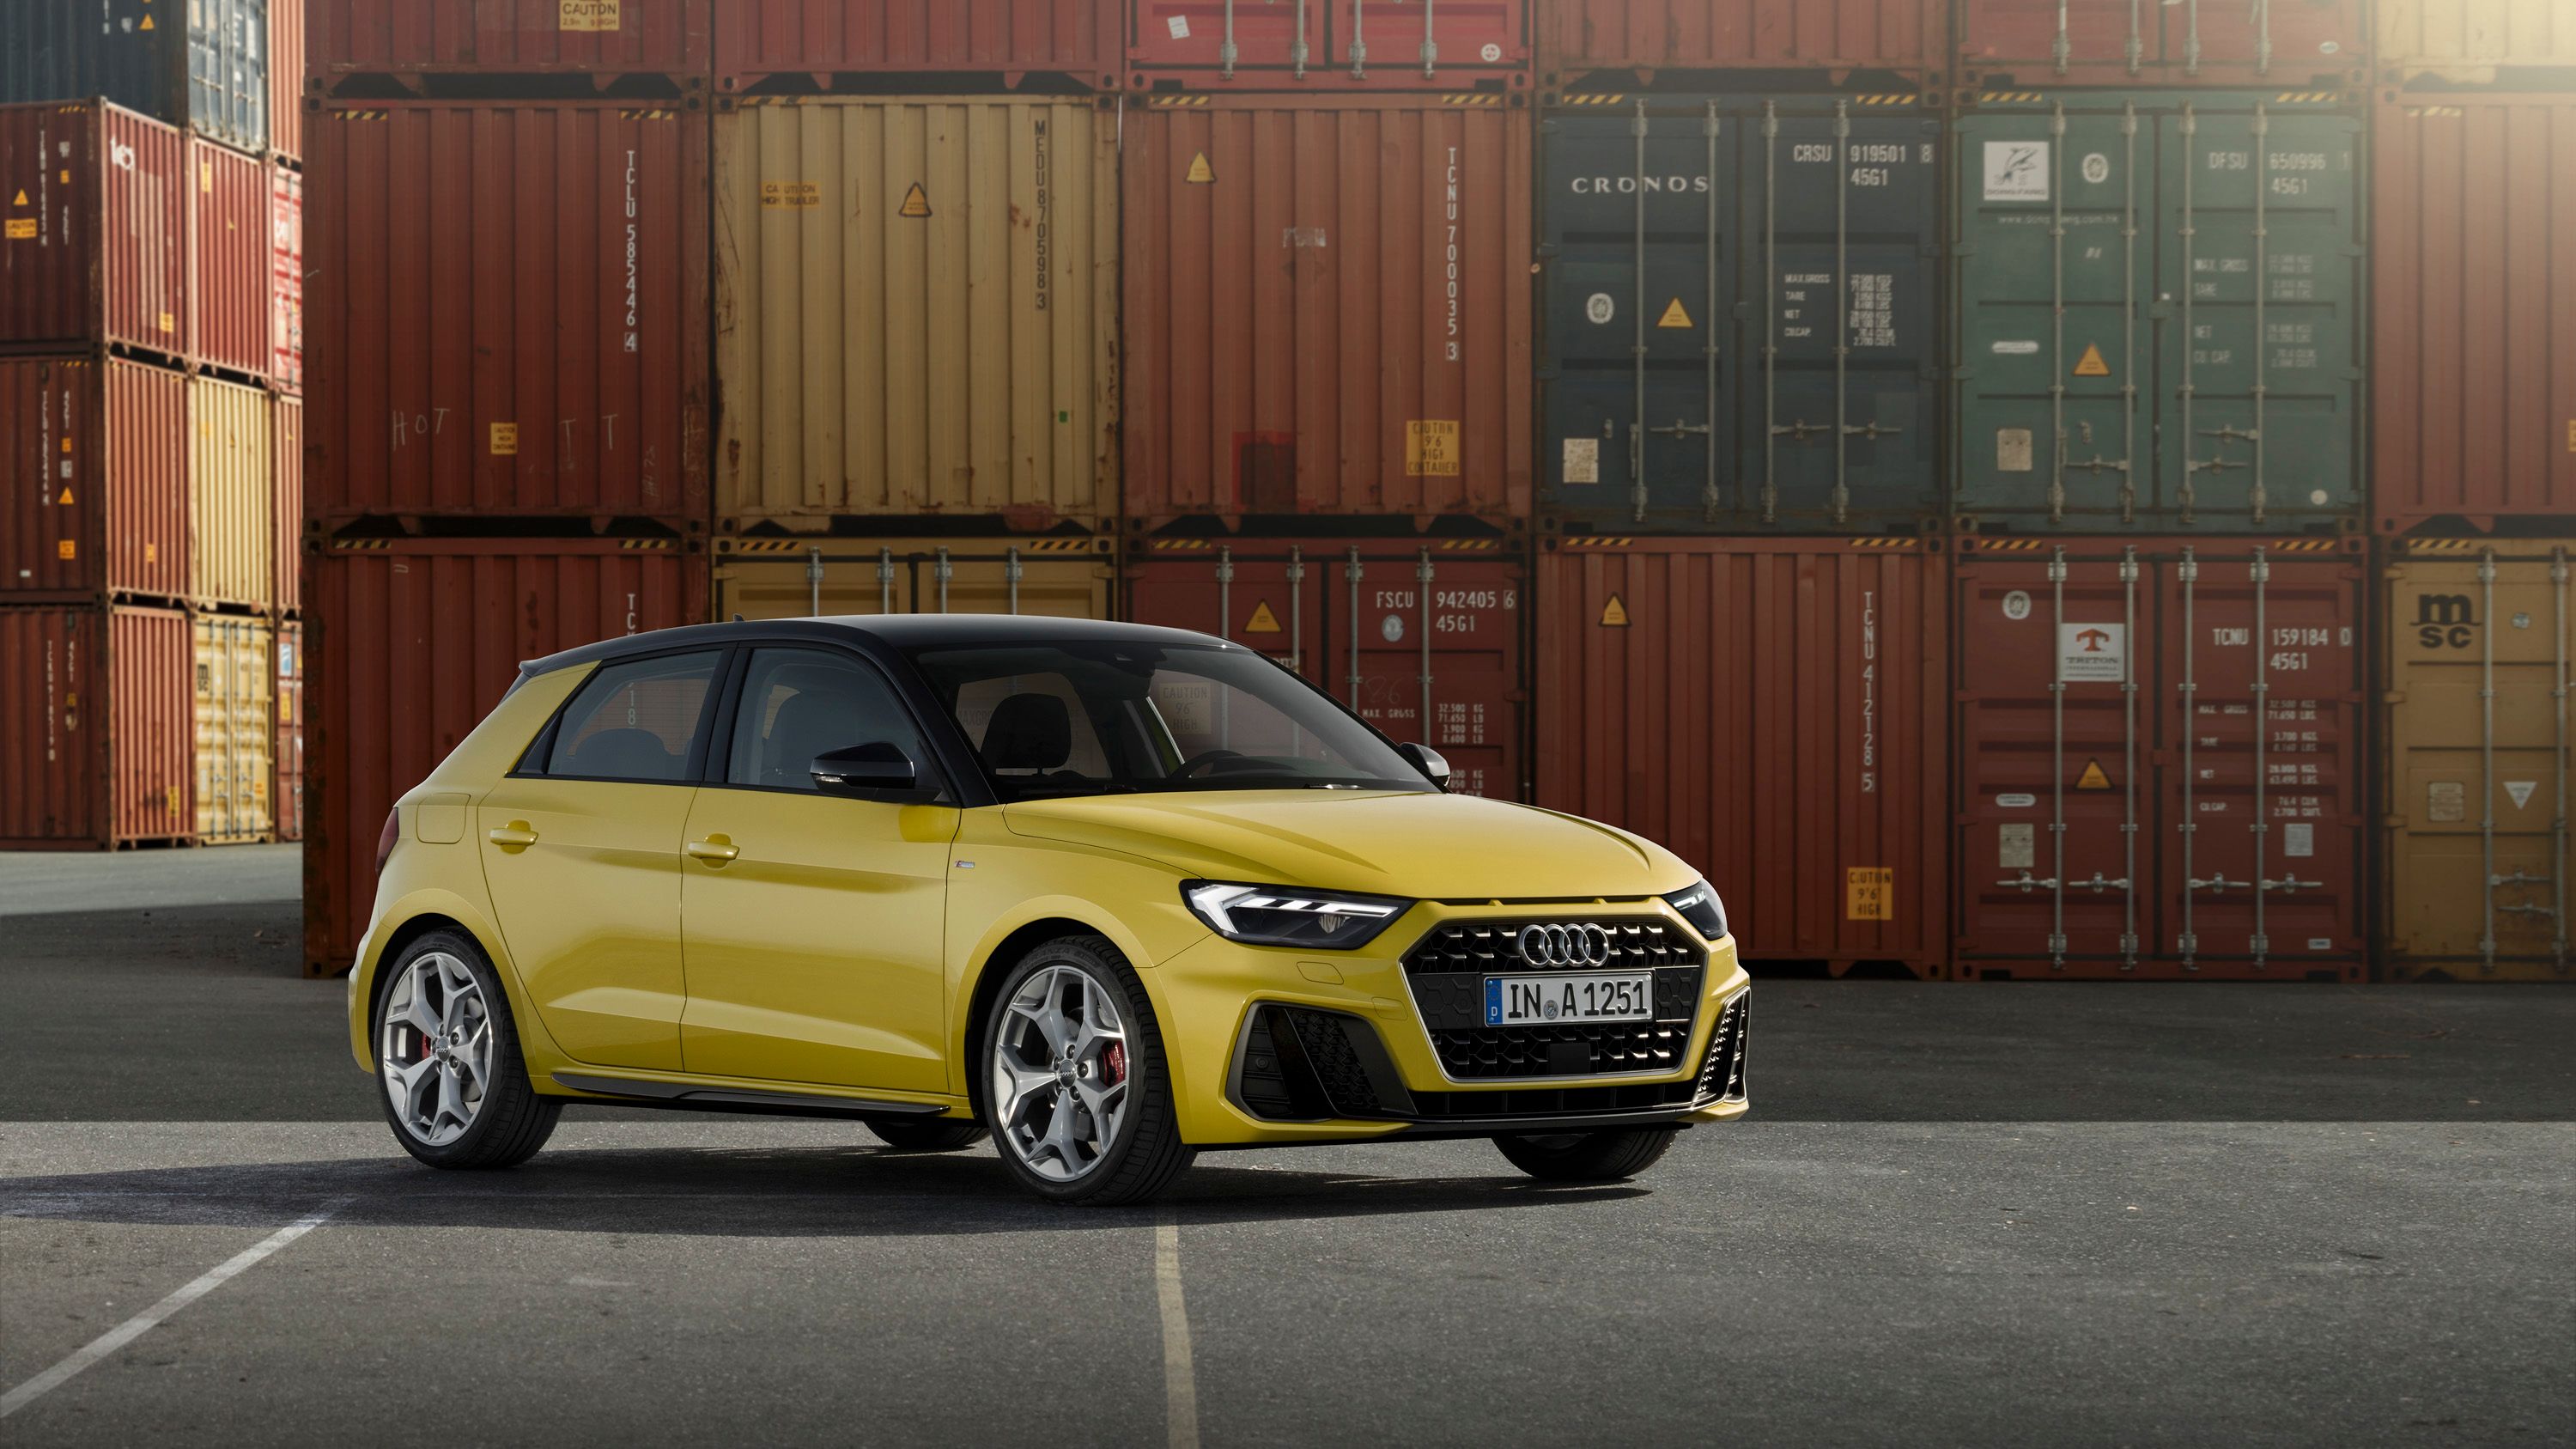 2019 - 2020 2019 Audi A1 Looks Bigger And Better in Paris 